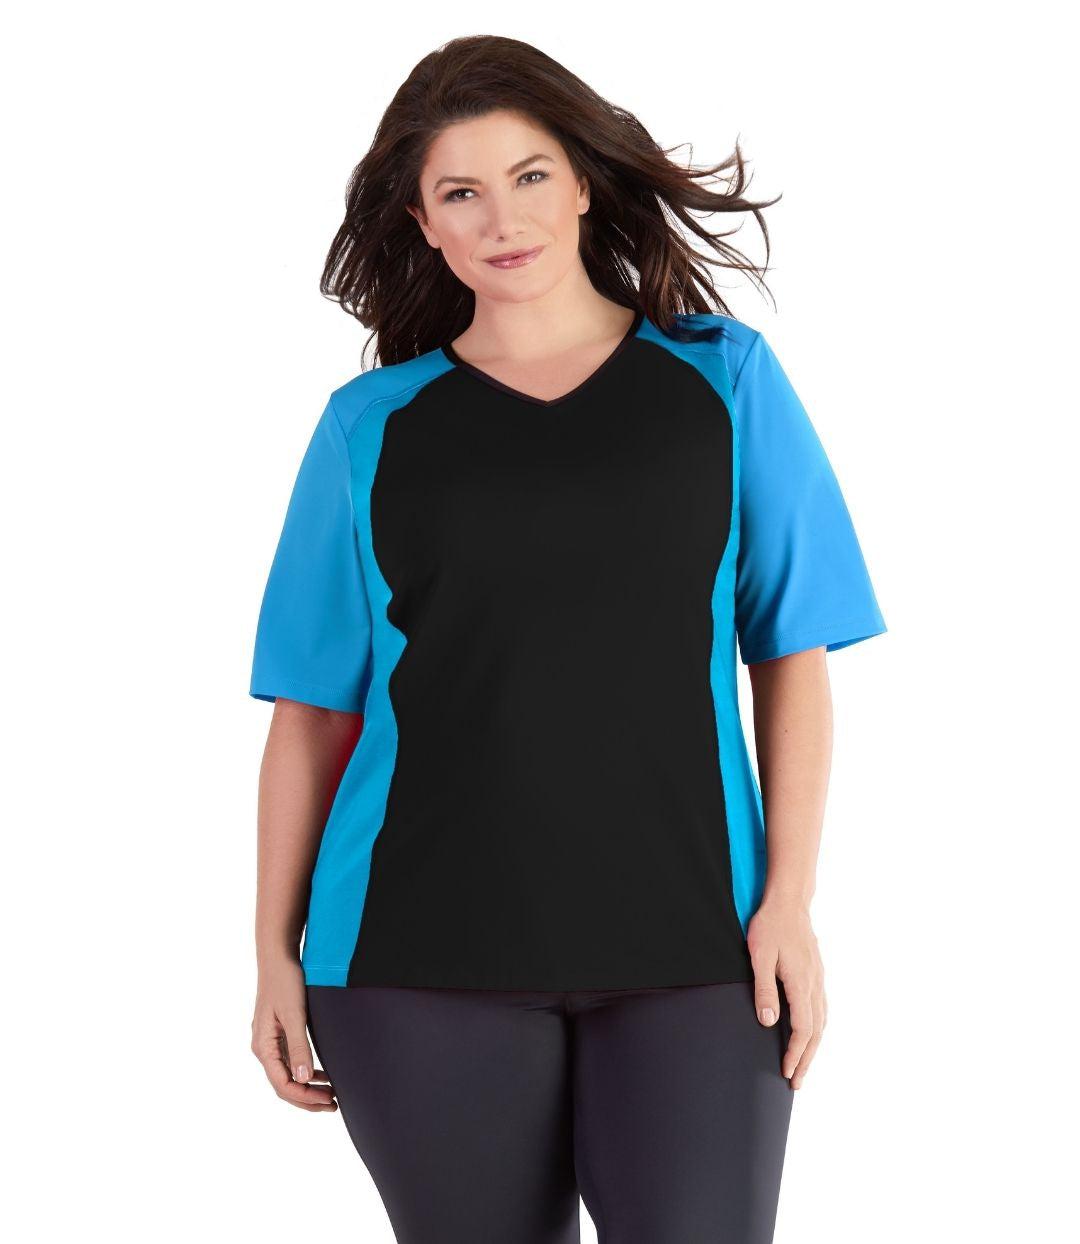 Plus size woman, facing front, wearing QuikEnergy Short Sleeve Swim and Sun Top Black and Turq. Solid Black on the center torso and solid turquoise colorblocking on the sleeves and waist. Long cover short sleeves meeting at the elbow.  